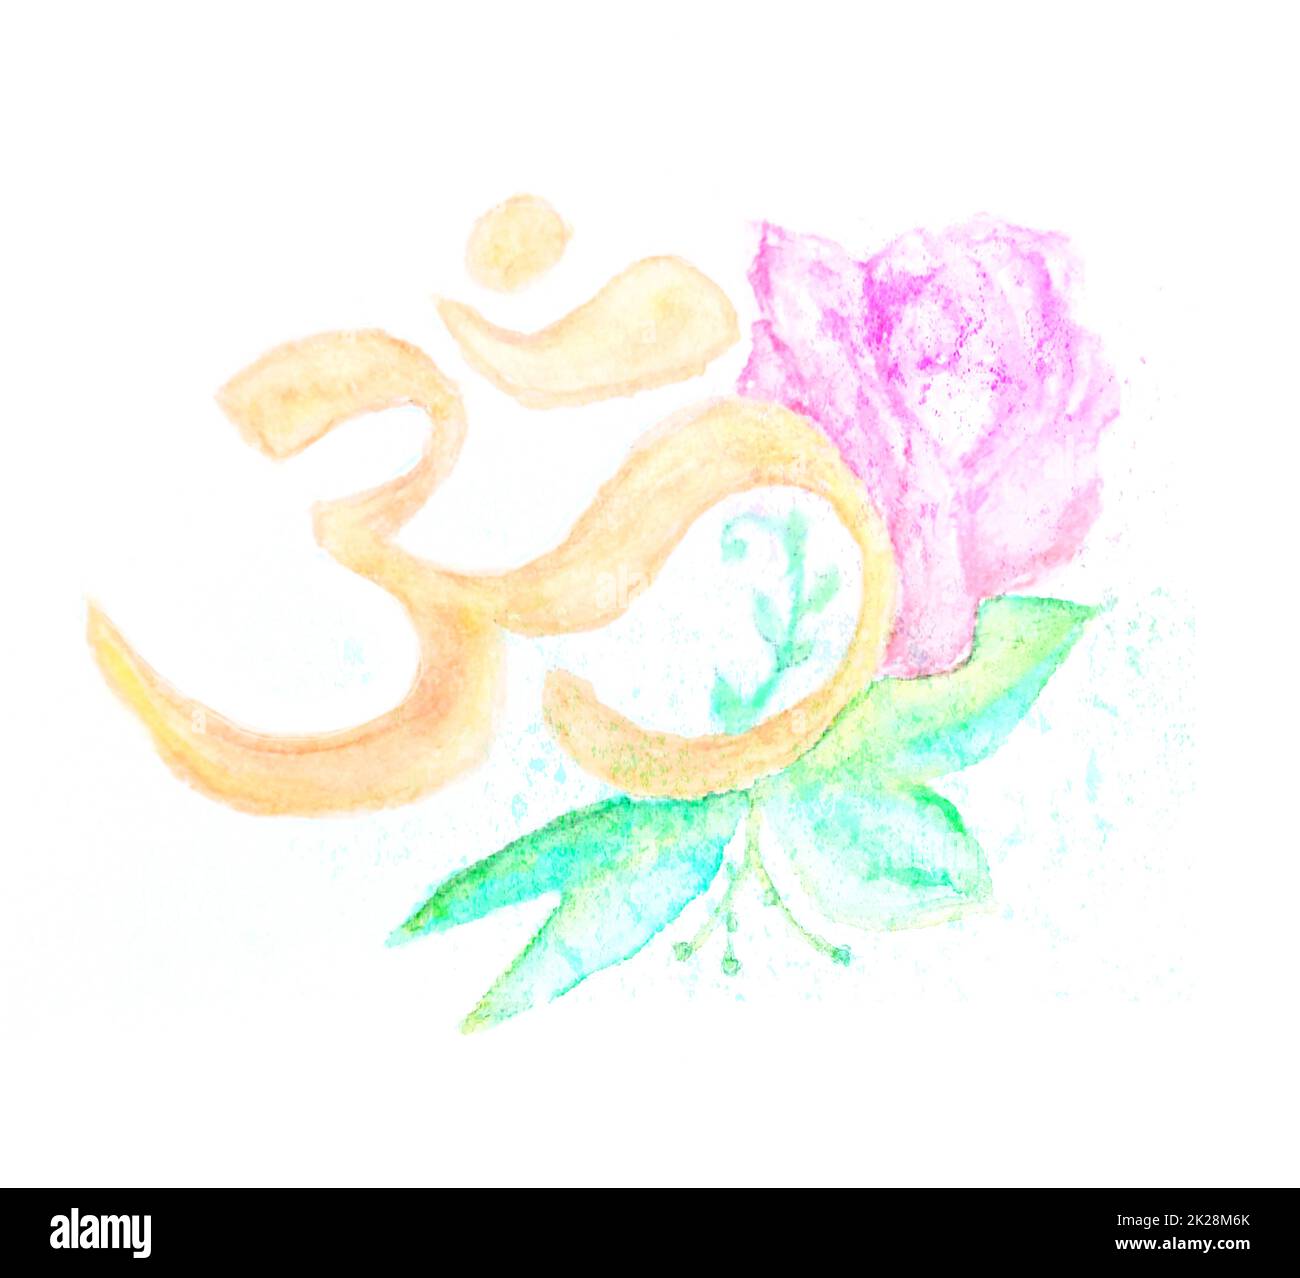 Watercolor OM symbol with flowers Stock Photo